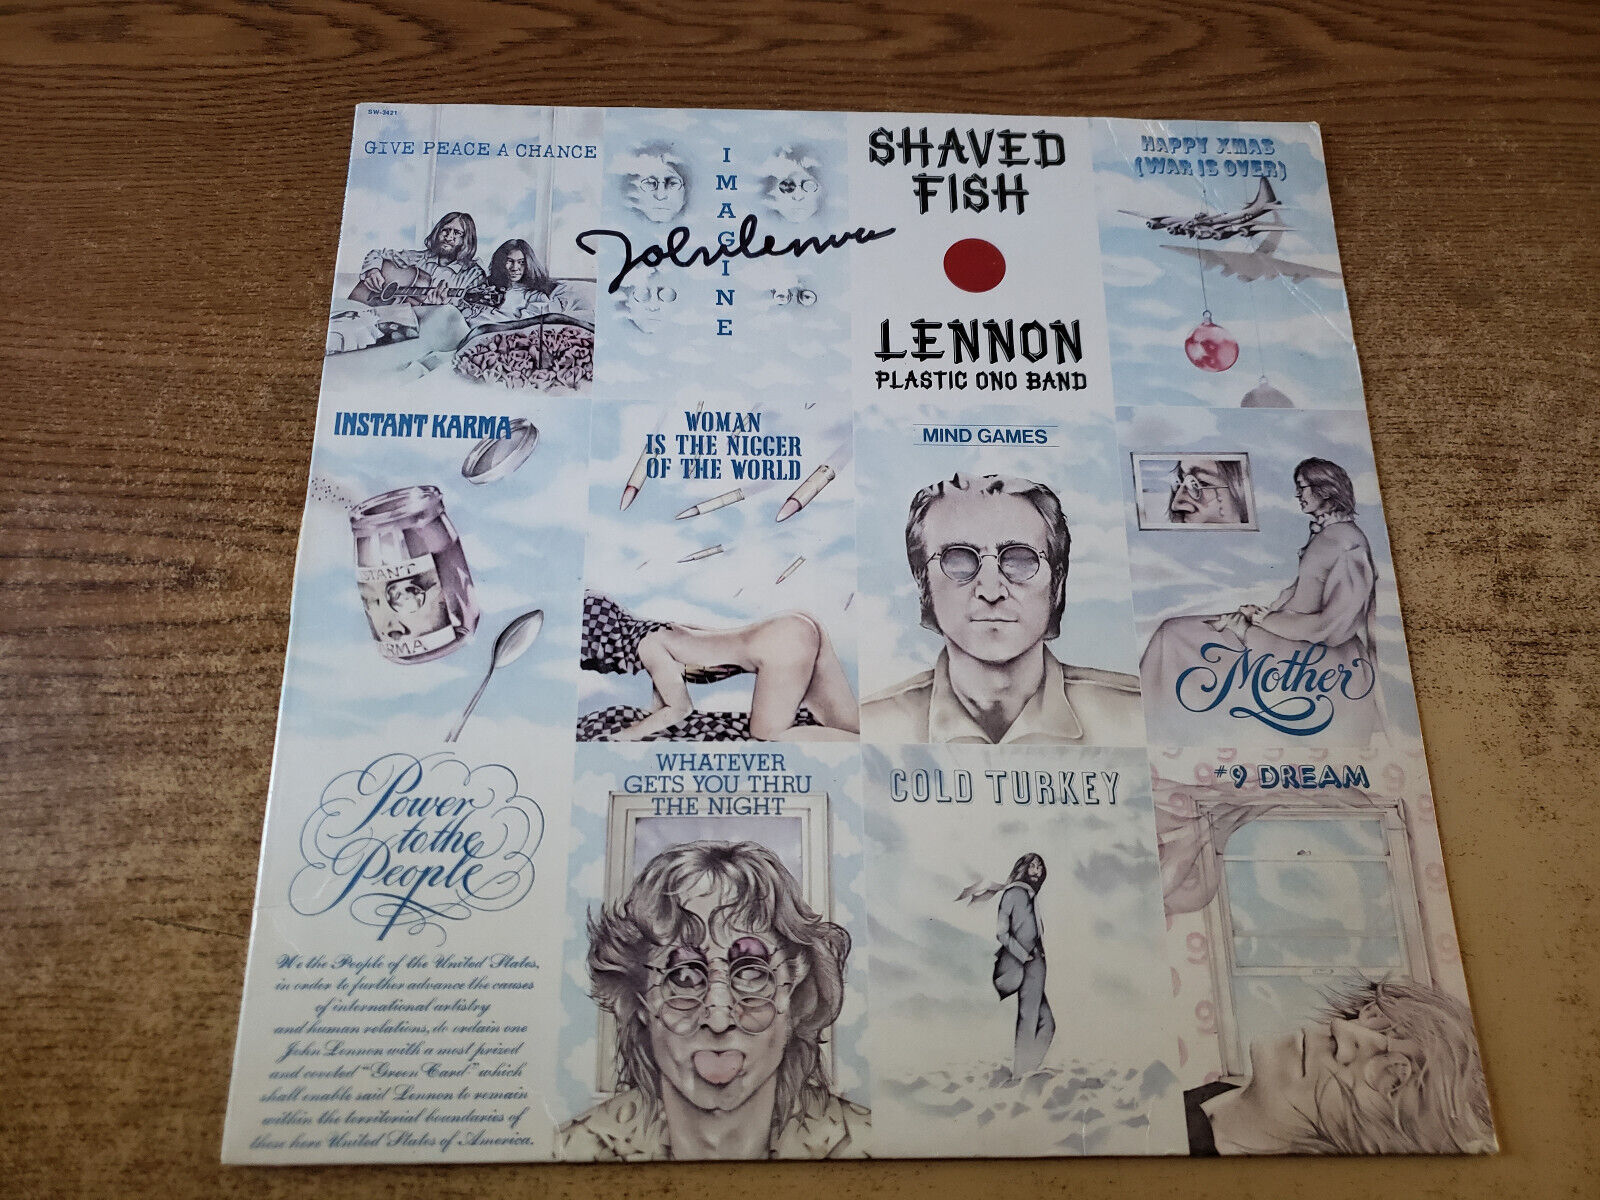 SIGNED 1970's VG++ ALBUM COVER ONLY JOHN LENNON SHAVED FISH NO RECORD 3421 LP33